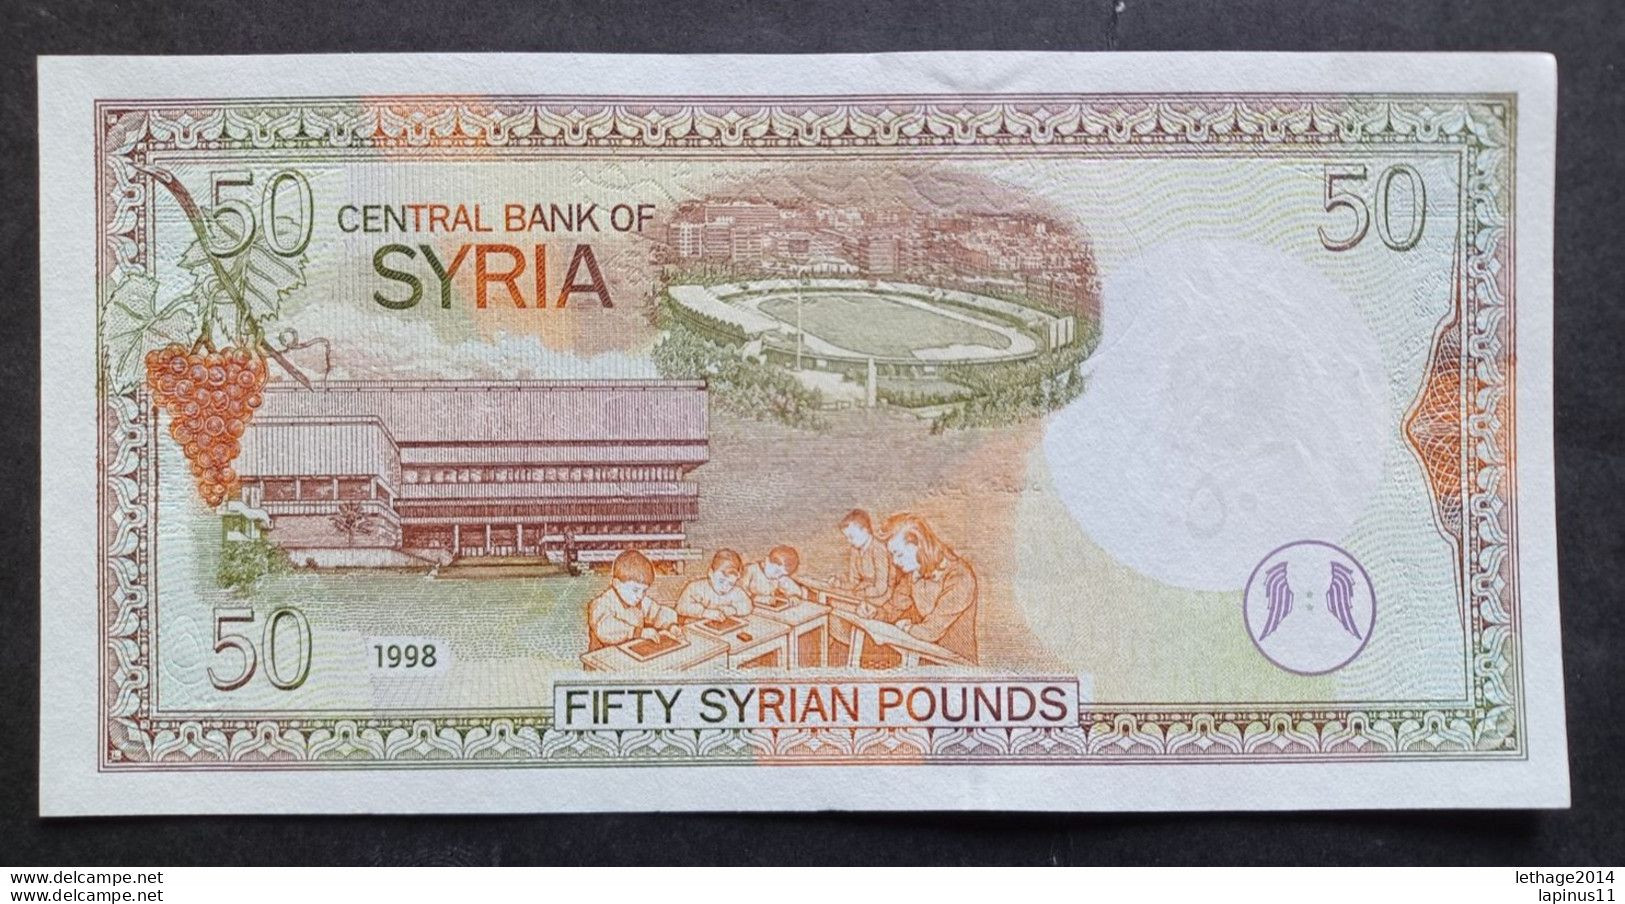 BANKNOTE SYRIA SIRIE 50 POUNDS CITADEL OF ALEPPO 1998 UNCIRCOLATED - Syria